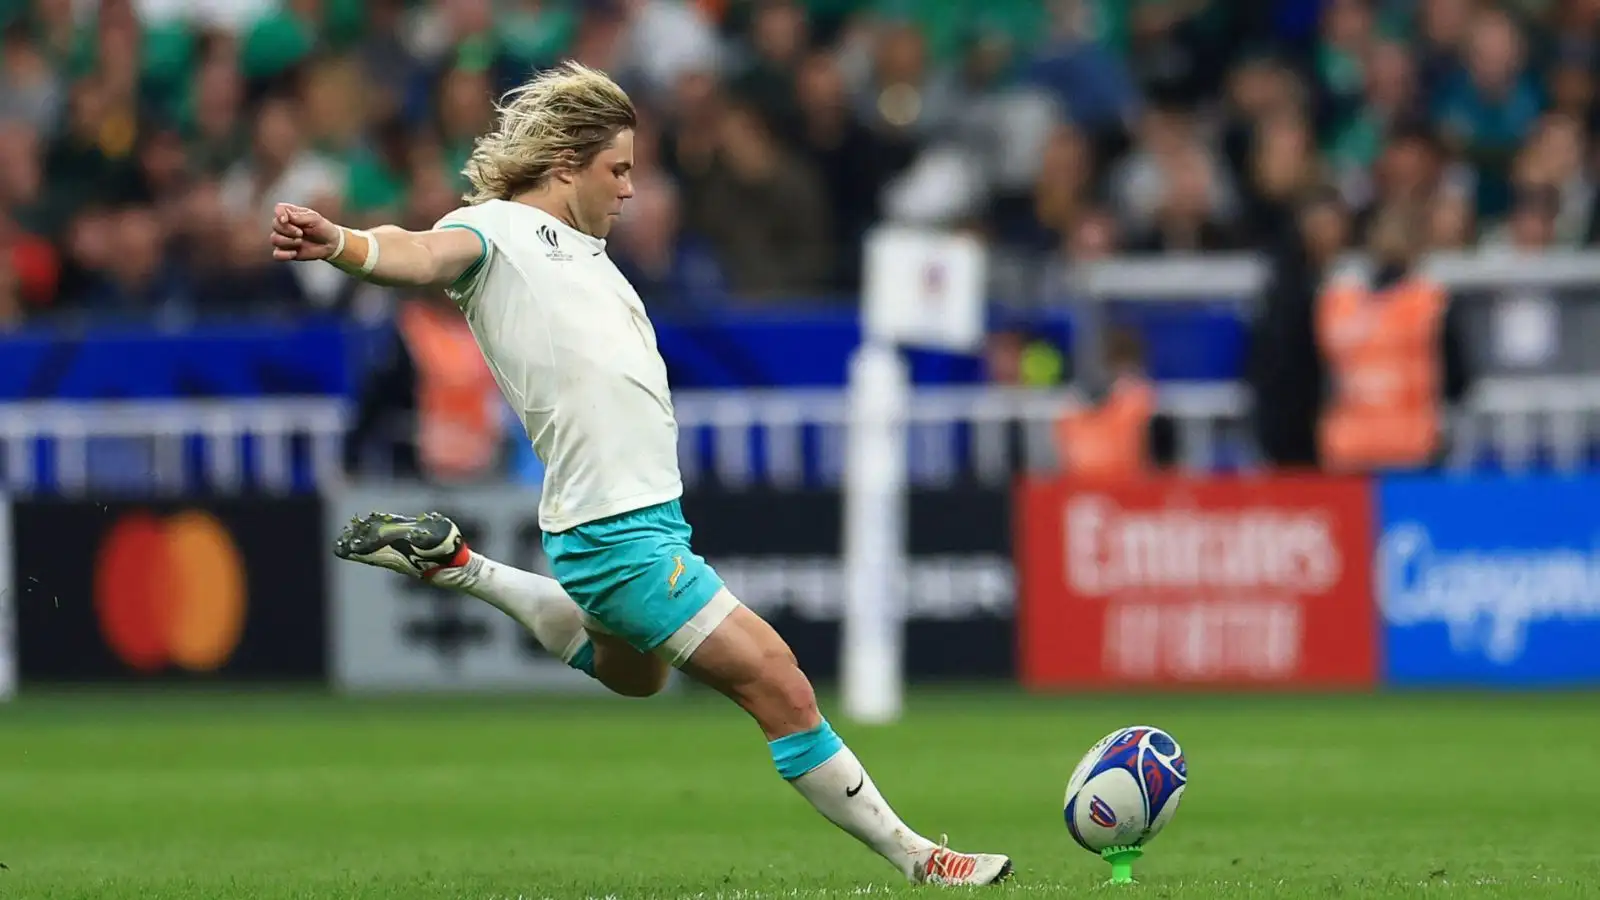 Faf de Klerk attempts to kick a penalty goal during the Rugby World Cup Pool B match between South Africa and Ireland at the Stade de France in Saint-Denis